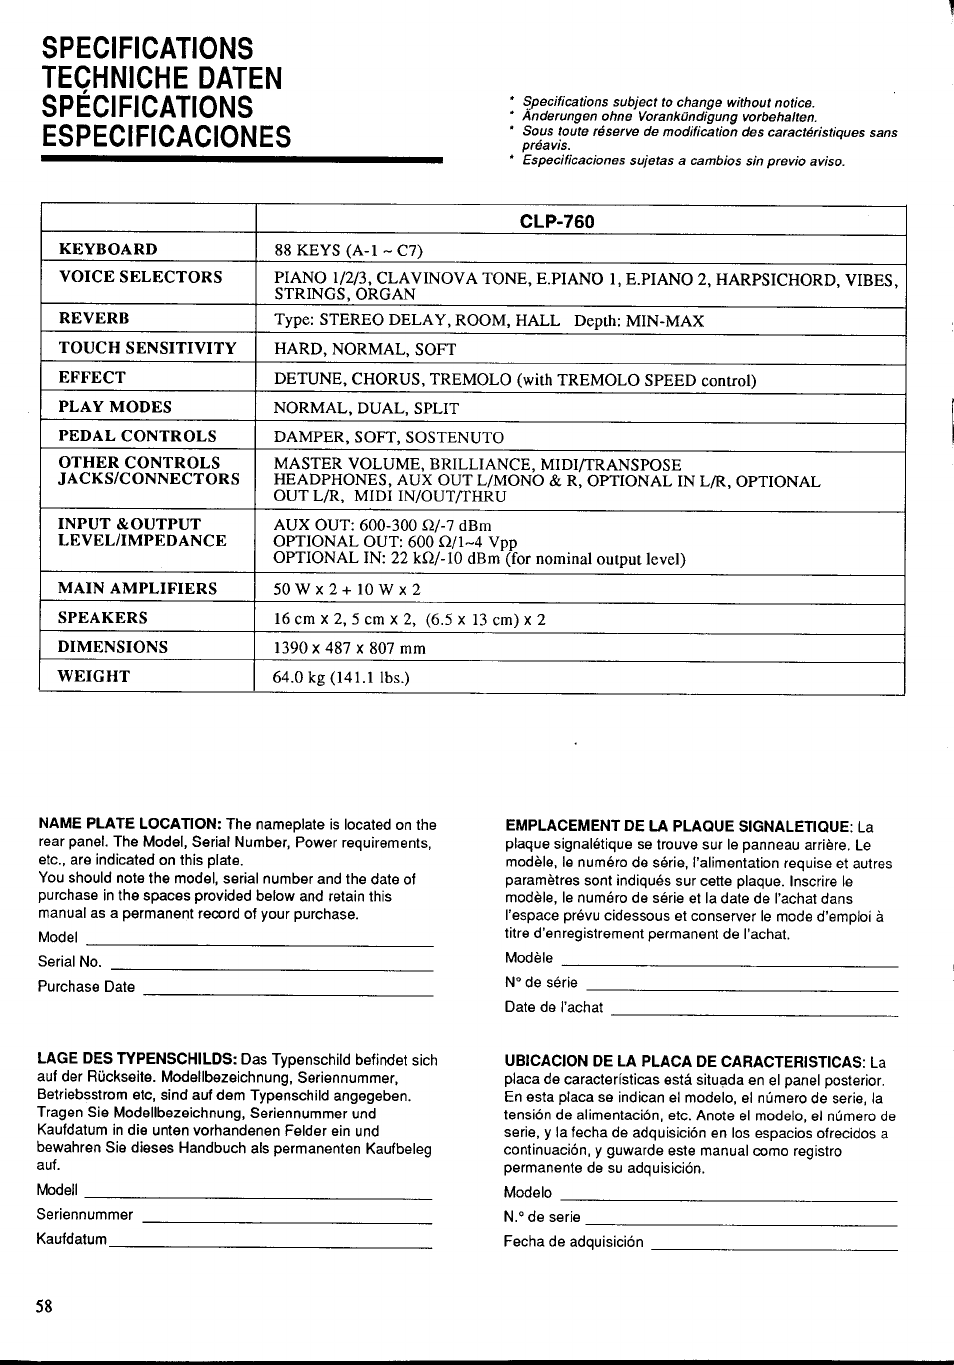 Specifications techniche daten | Yamaha CLP-760 User Manual | Page 24 / 27